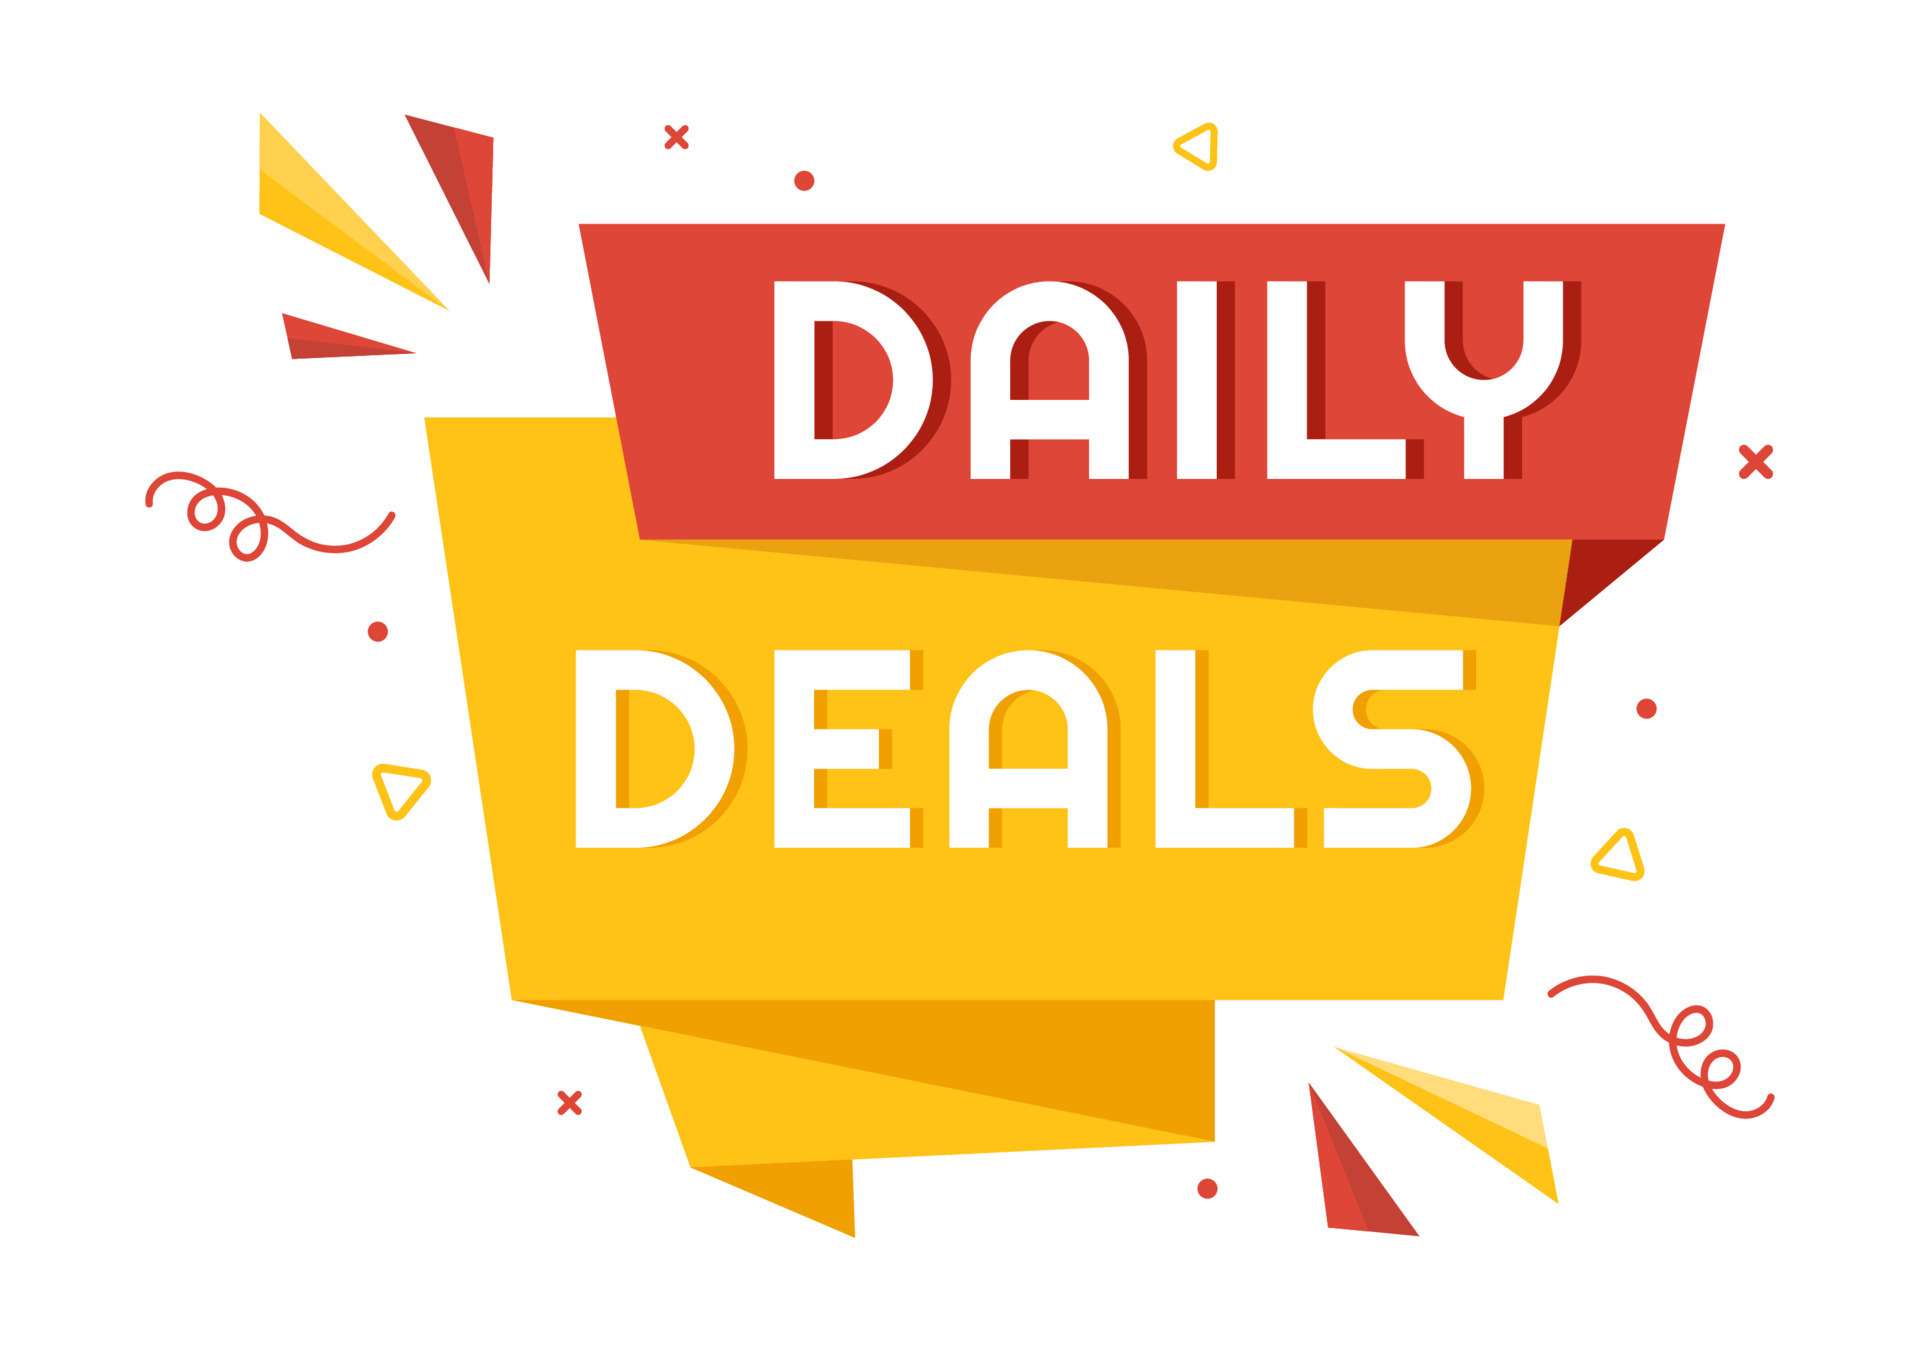 Deals of the Day